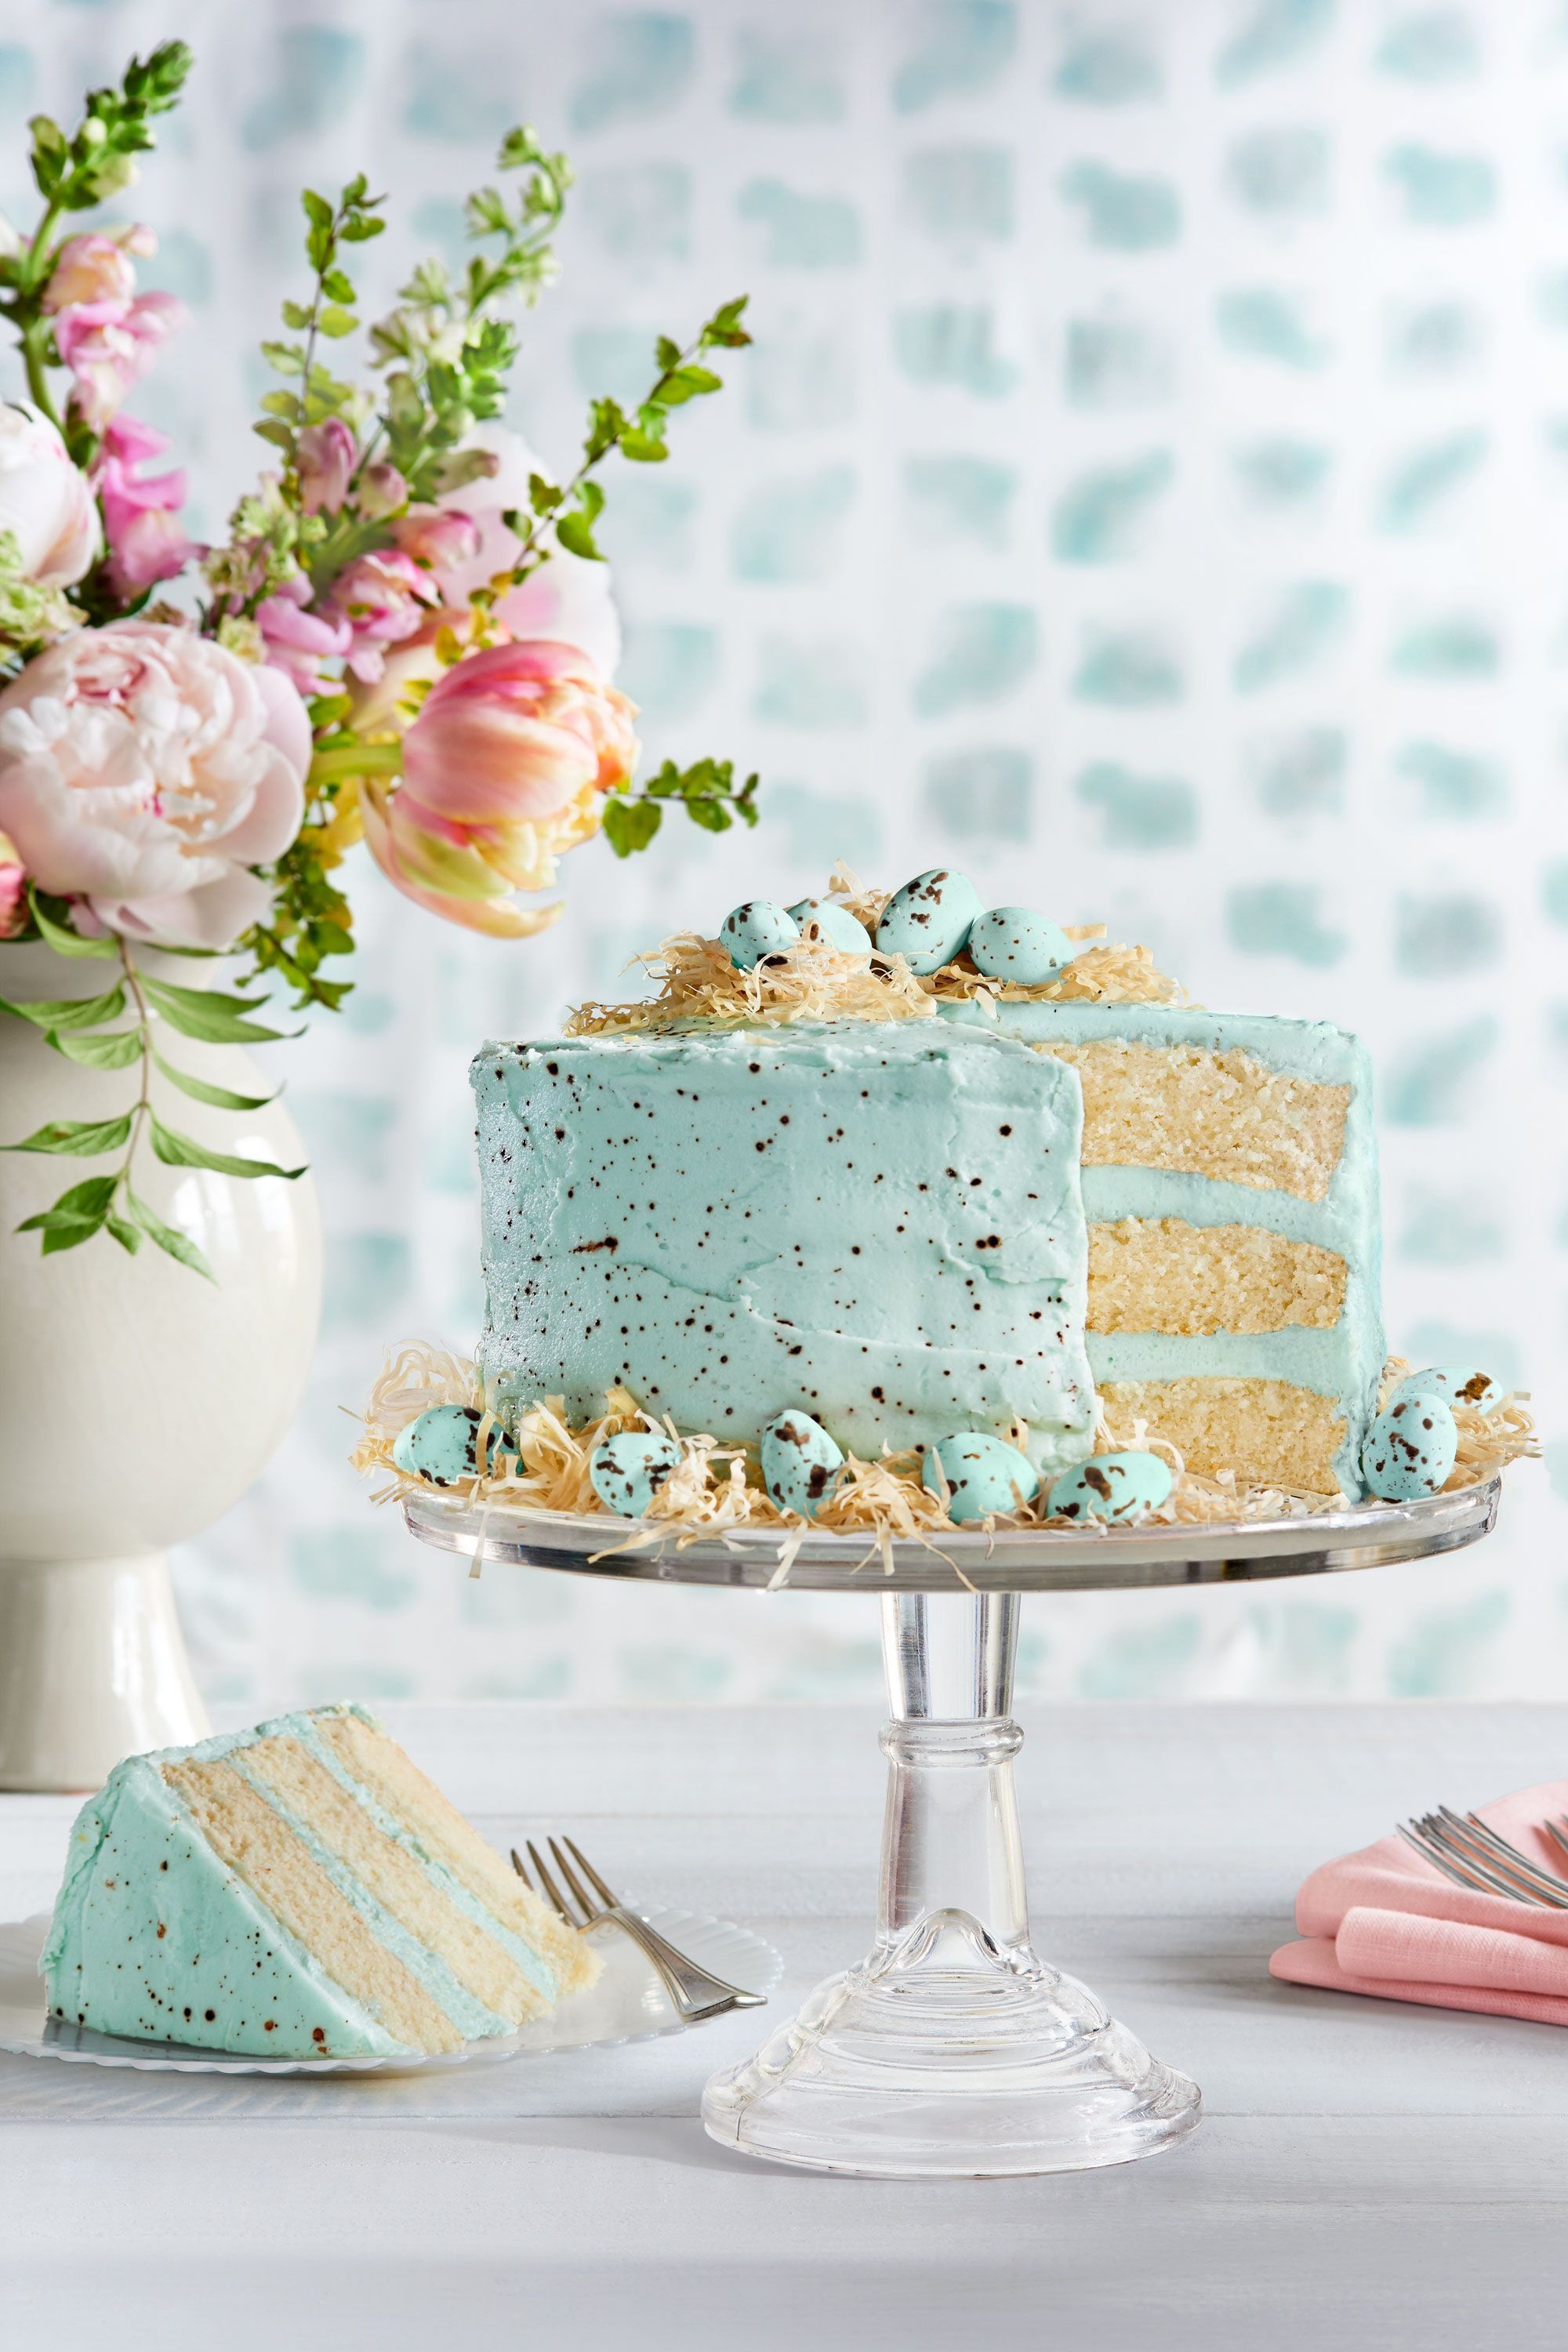 12 Best Easter Cake Ideas - Parade